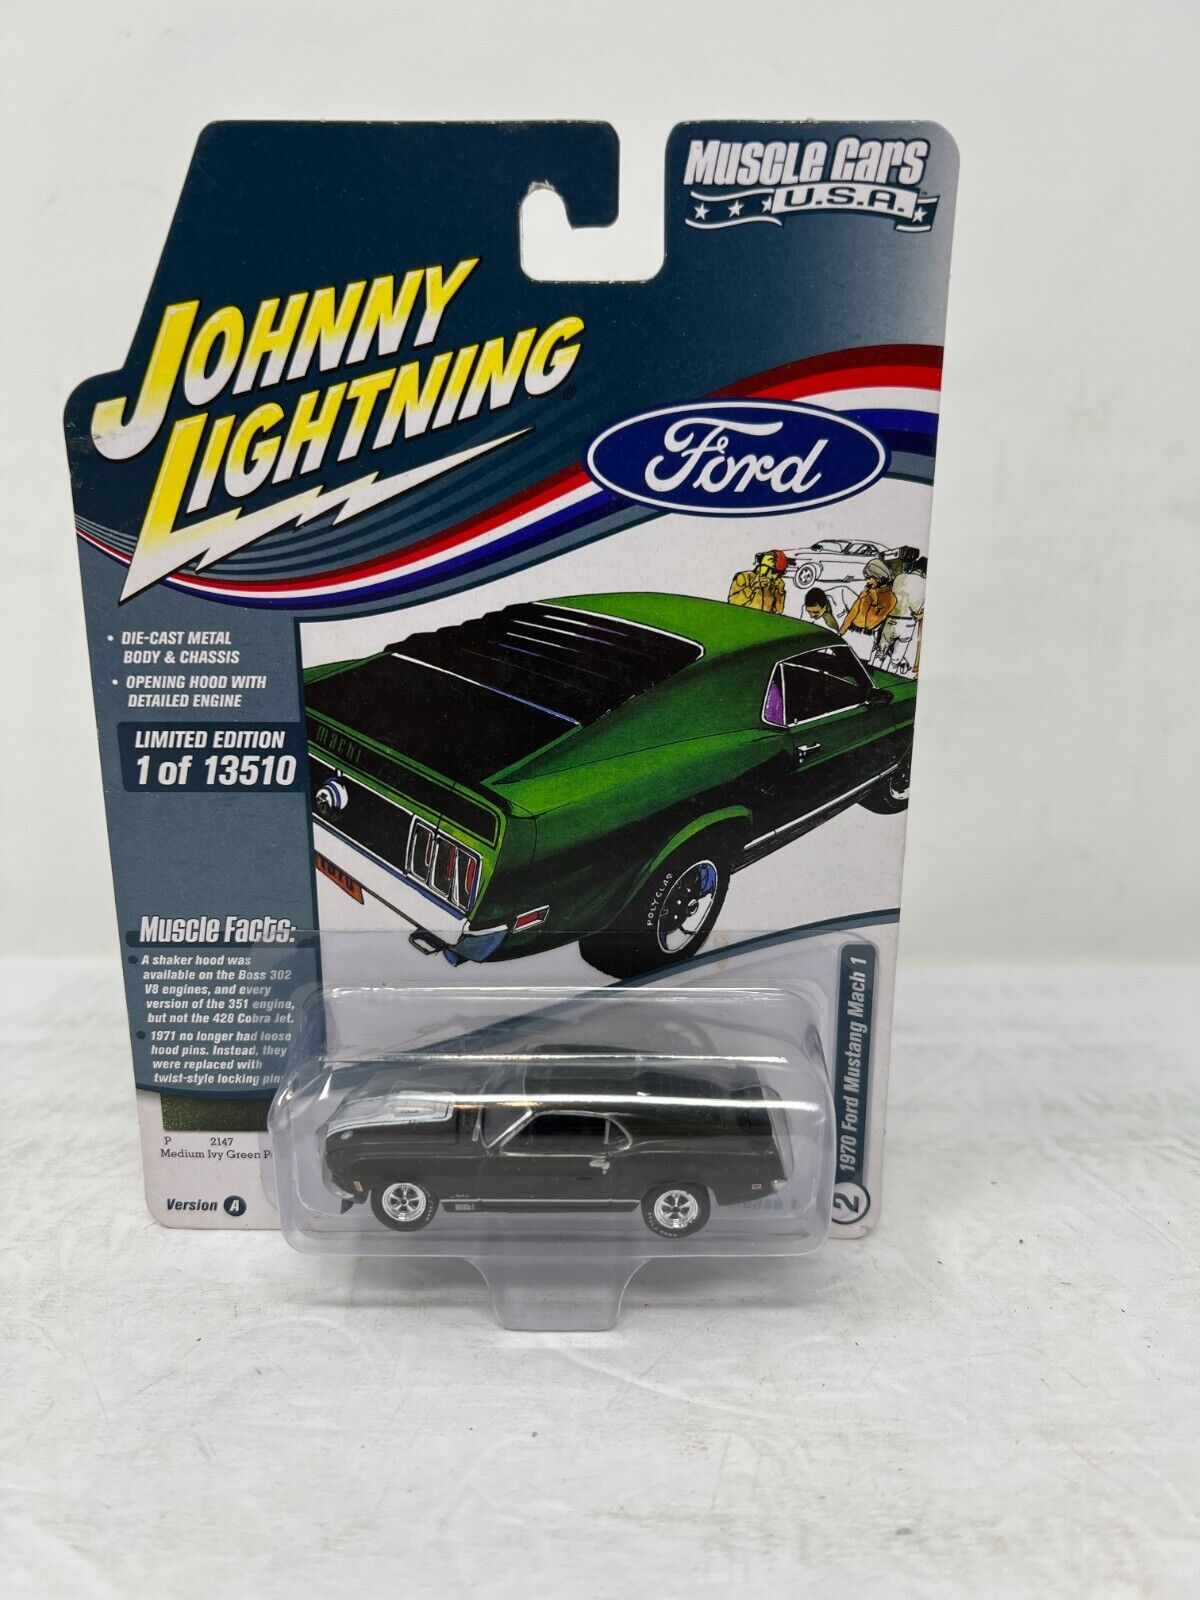 Johnny Lightning Muscle Cars U.S.A. 1970 Ford Mustang Mach 1 1:64 Diecast